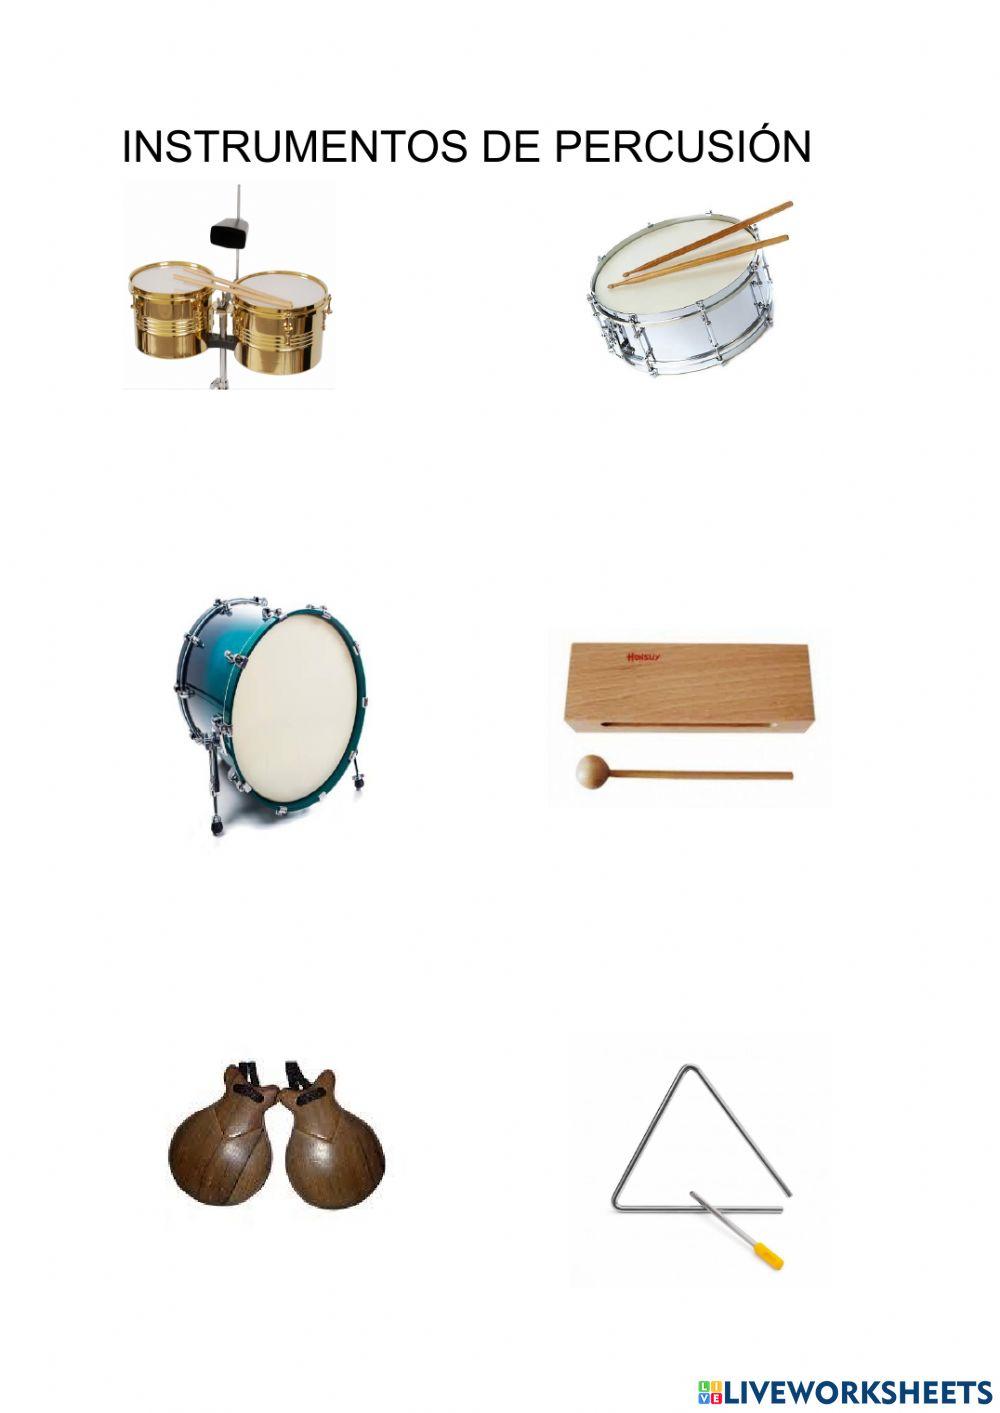 Instrumentos de percusion interactive exercise for 1 eso | Live Worksheets